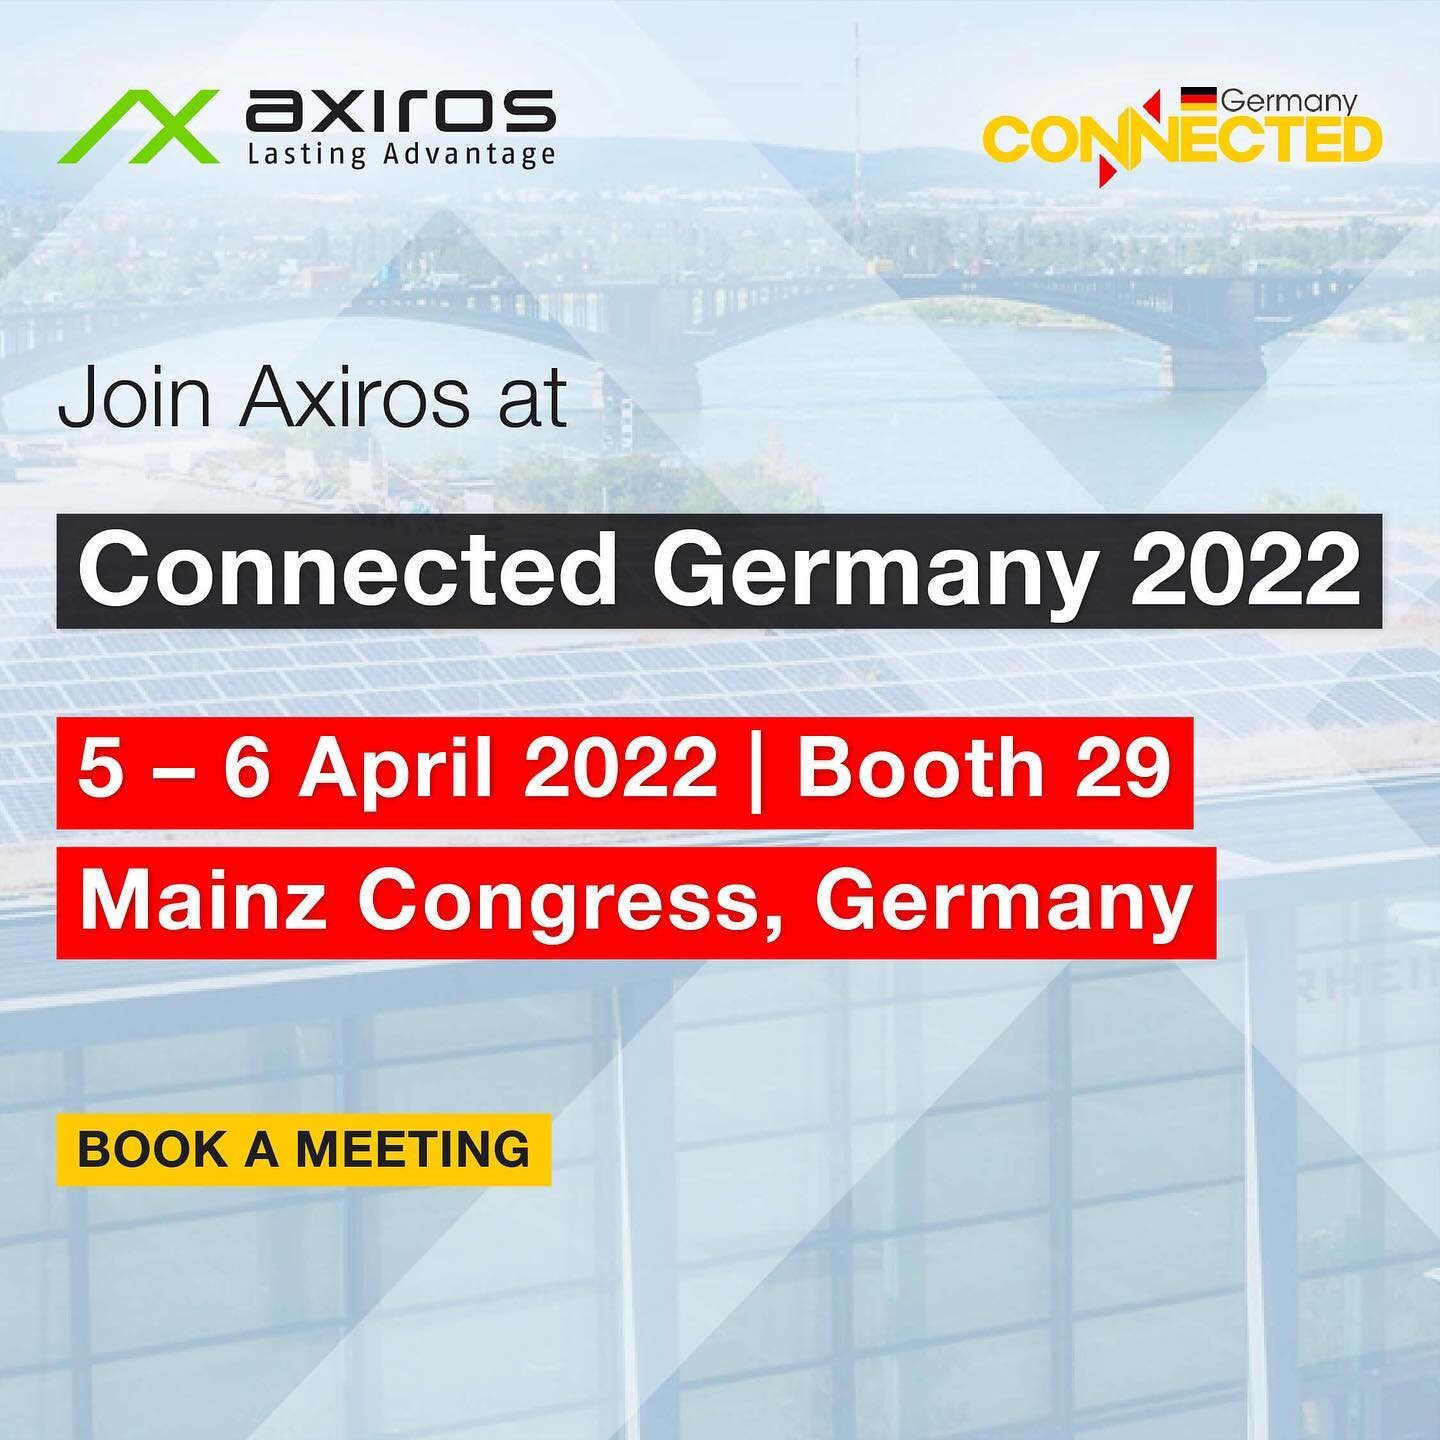 [Events] #Axiros at Connected Germany 2022!

Watch out for Axiros, booth 29, and join our sessions on #DeviceManagement #WiFiOptimization #USP #TR069 #TR369 #QoE #ServiceAssurance #IoT and more.

Get in touch! ➡️ http://ow.ly/zcxf50IzzZg (Link in the